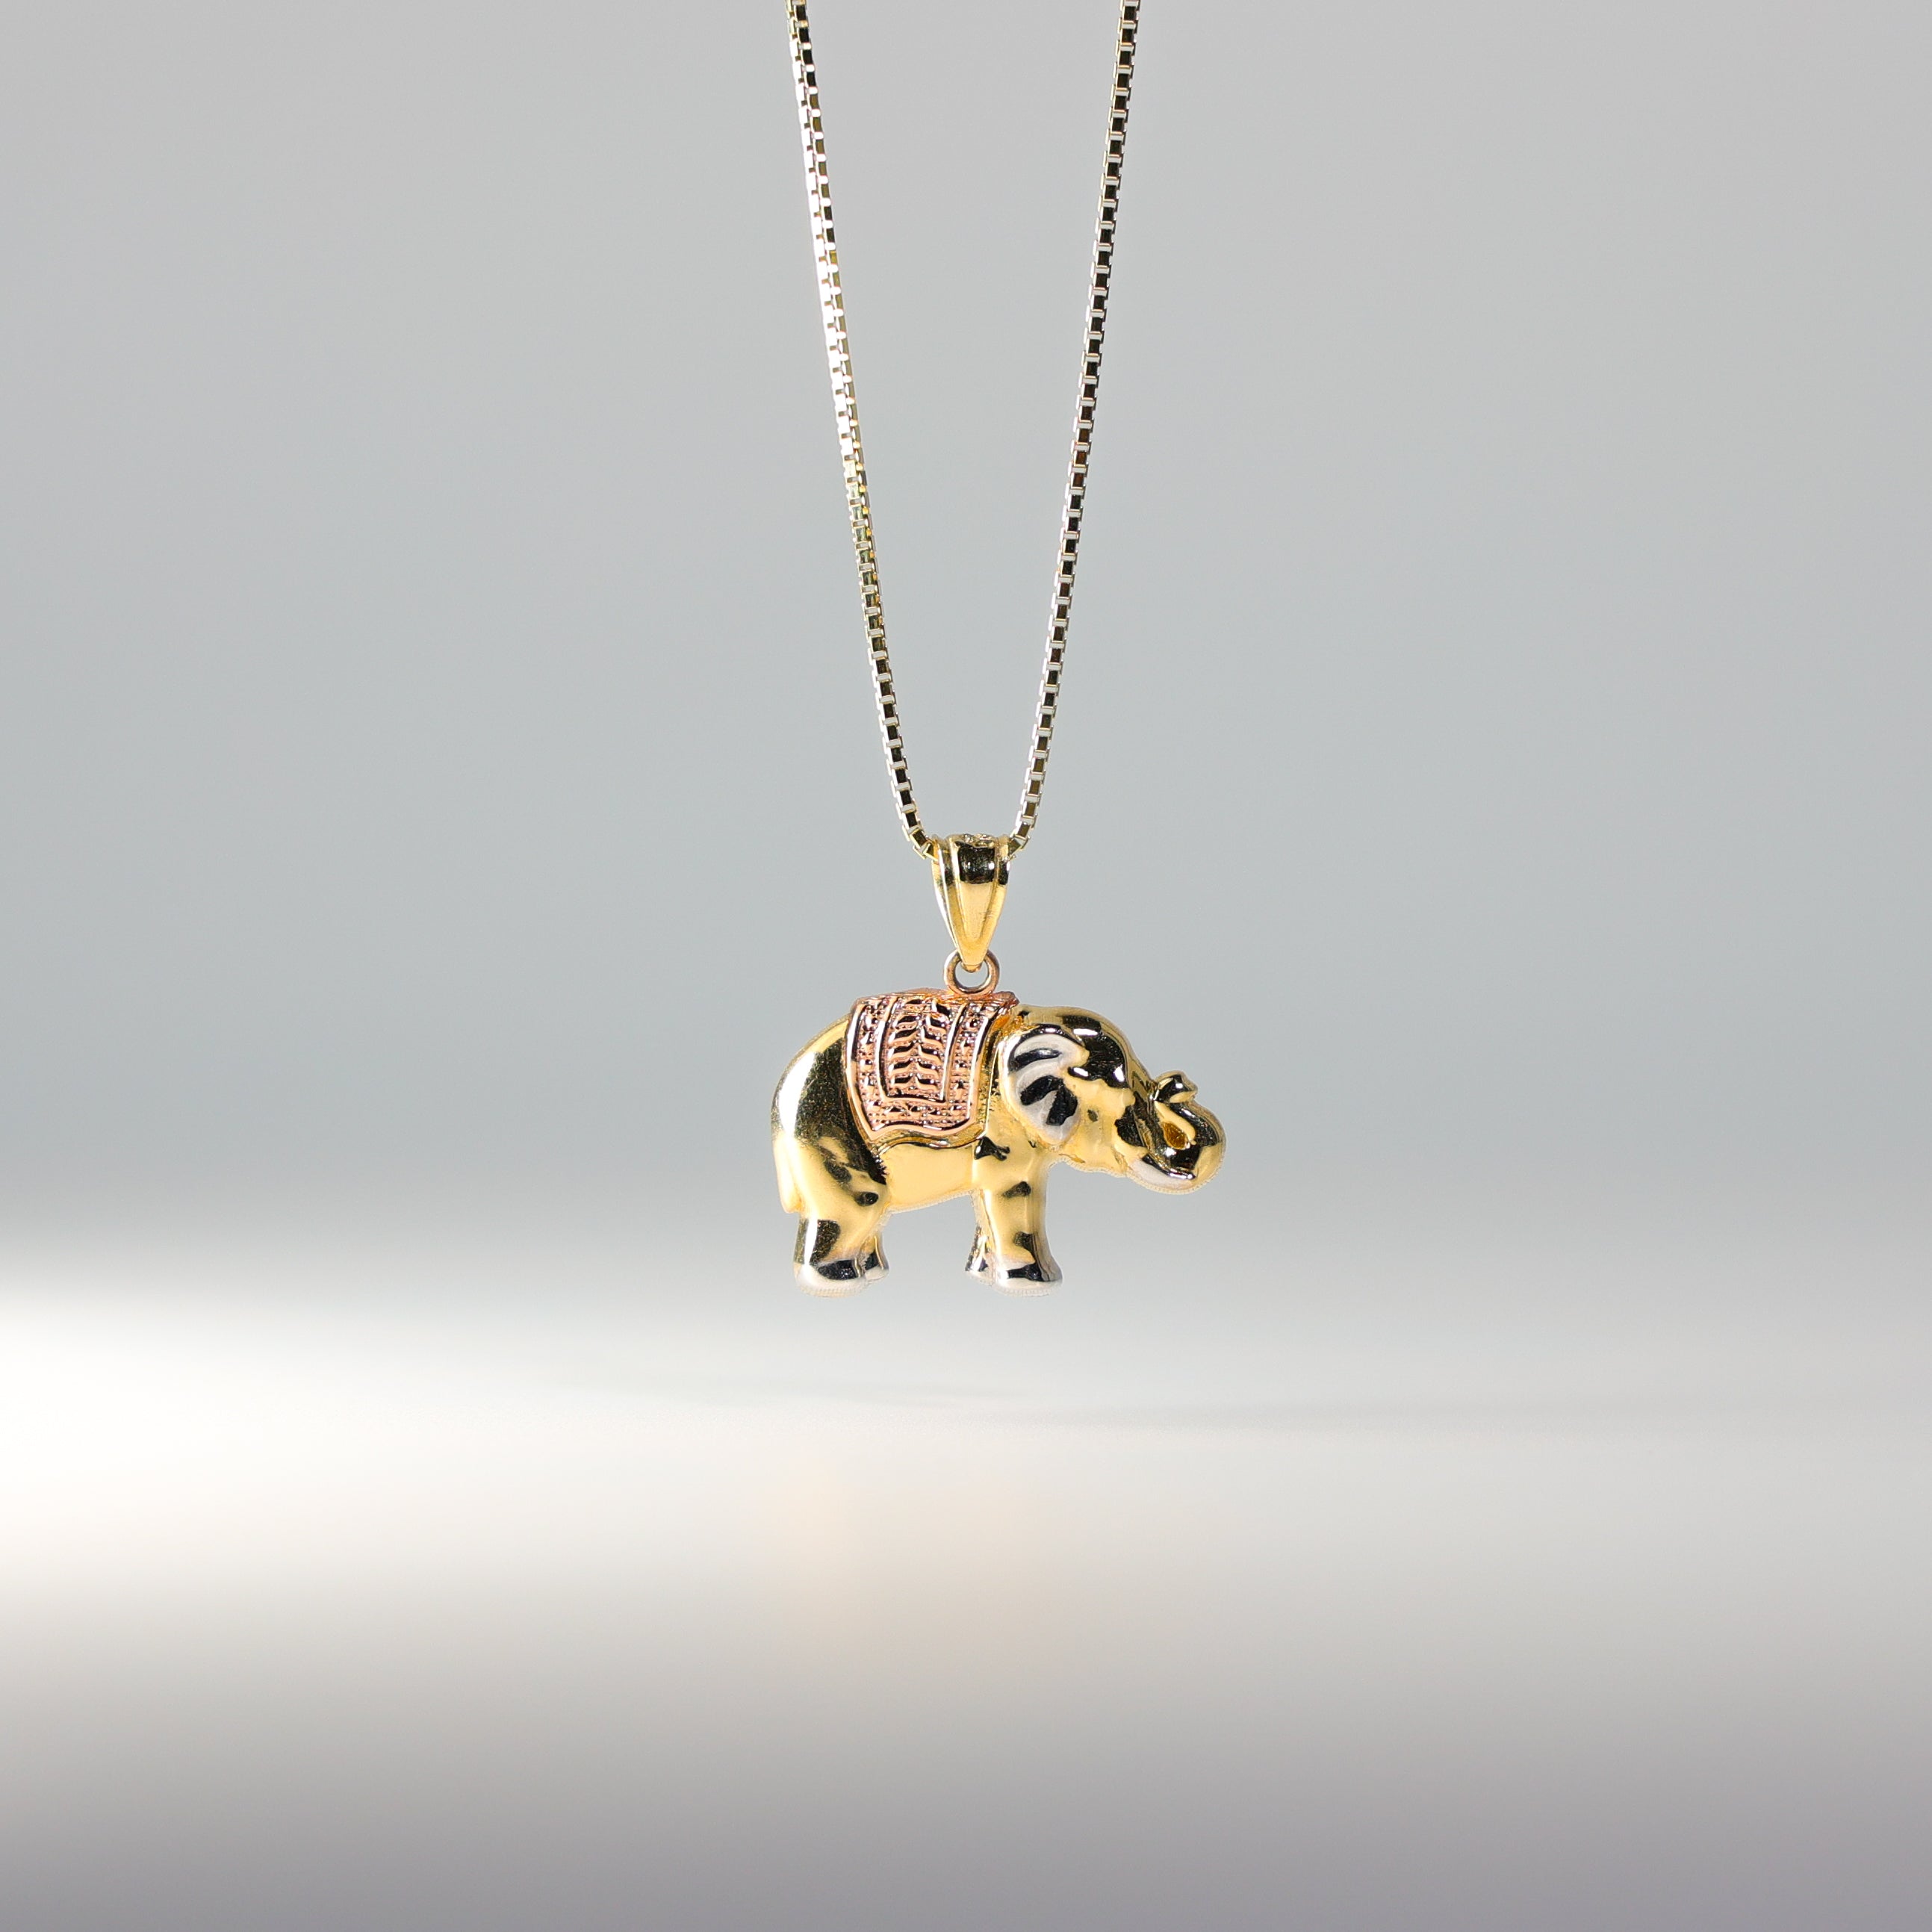 Gold 3 Colors Elephant Pendant Model-1624 - Charlie & Co. Jewelry